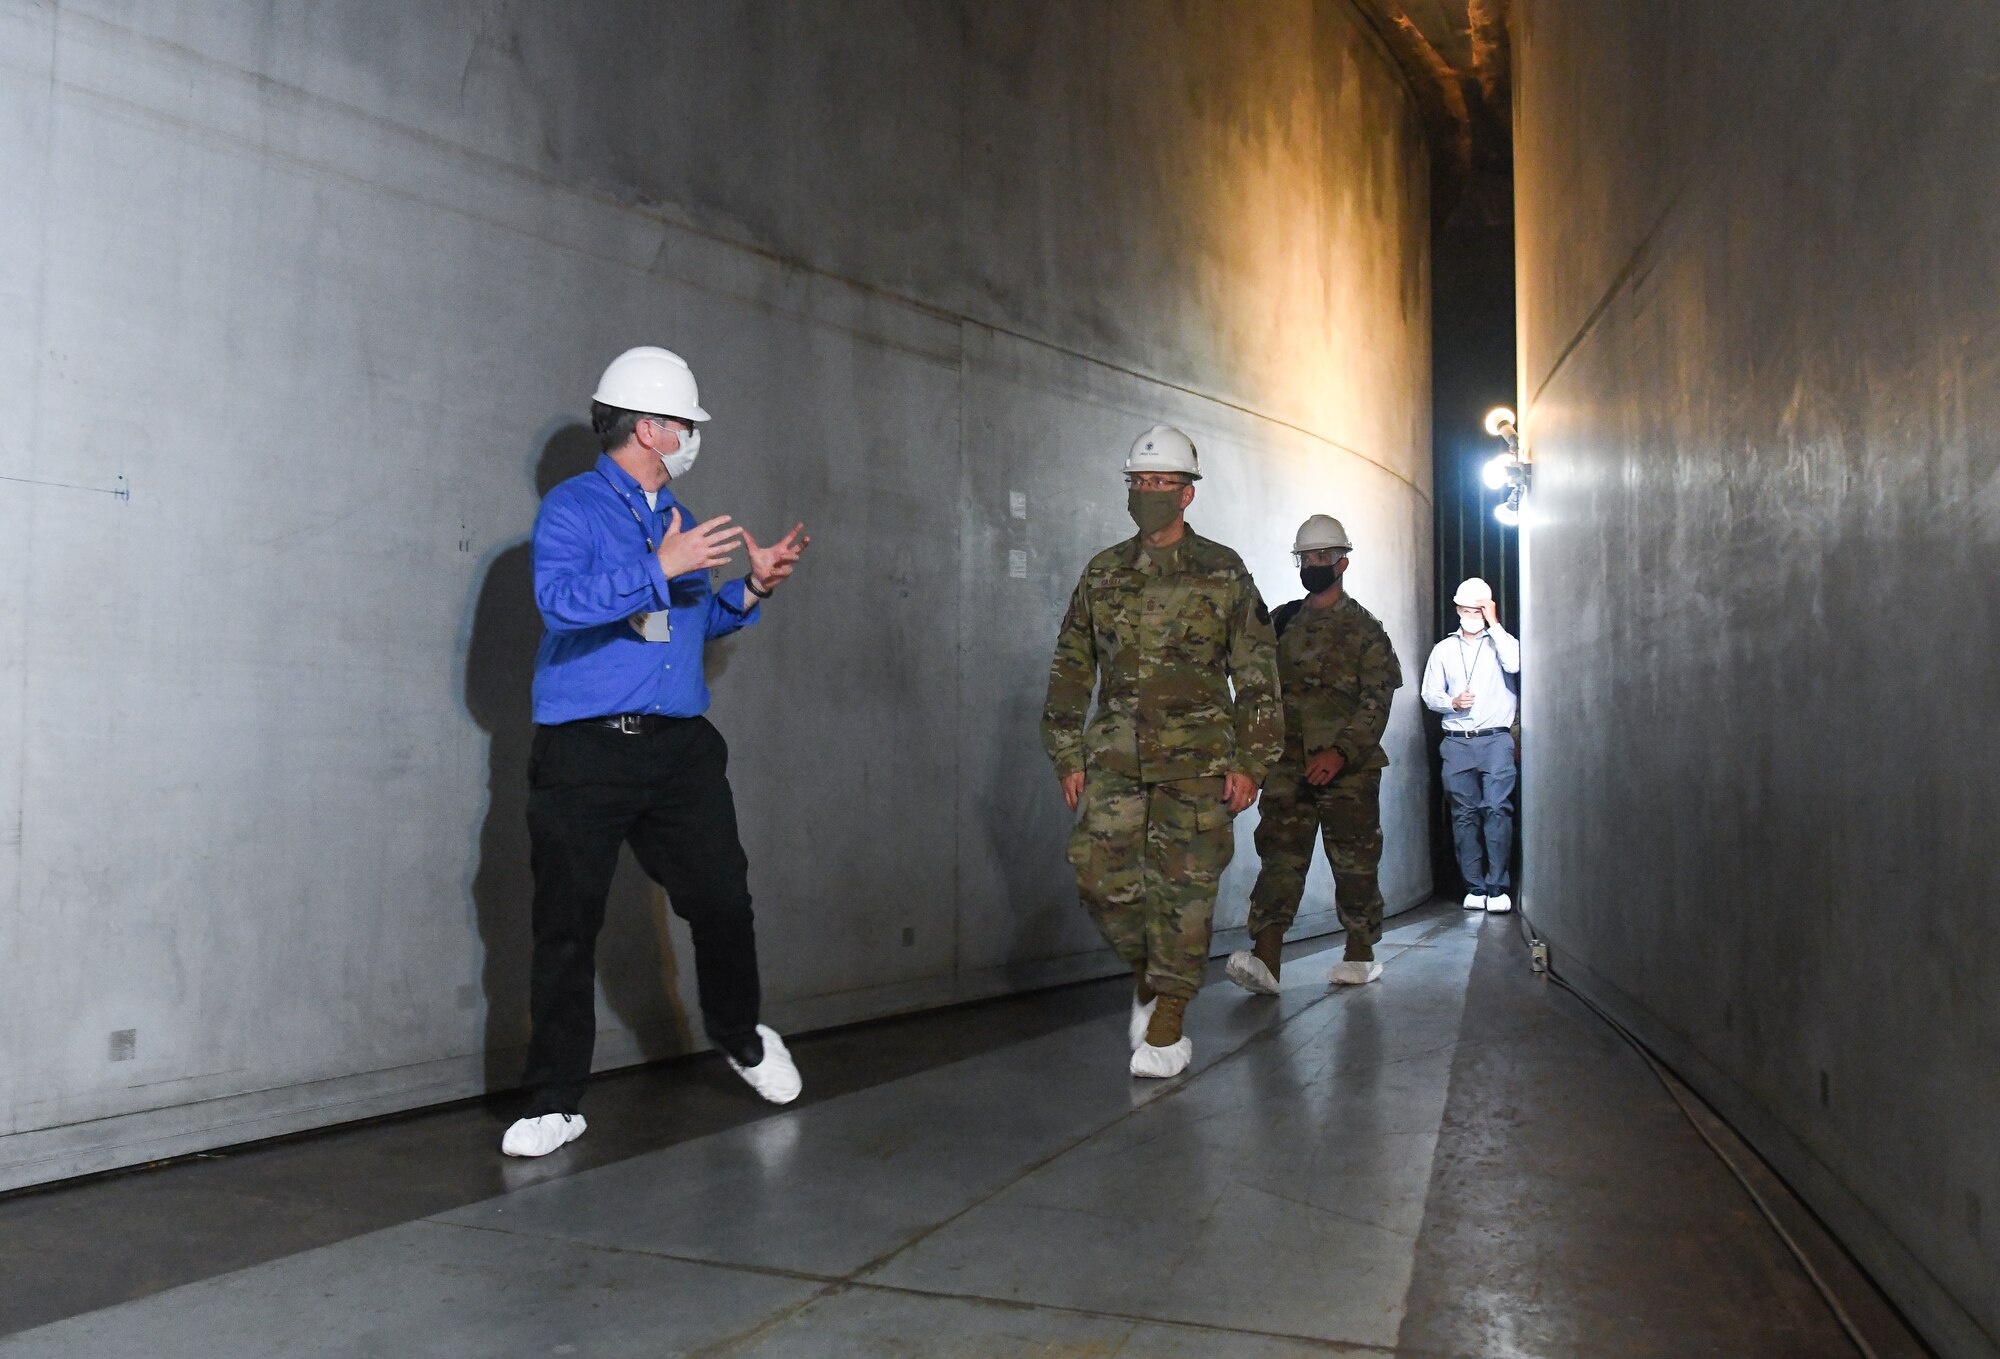 Scott Meredith, left, technical advisor for Arnold Engineering Development Complex (AEDC) Flight Systems Branch, talks about the 16-foot supersonic wind tunnel as he, Chief Master Sgt. Stanley Cadell, second from left, command chief, Air Force Materiel Command, and others, walk through the flexible nozzle of the tunnel, July 8, 2020, at Arnold Air Force Base, Tenn., headquarters of AEDC. The visit to the Base by Cadell and Gen. Arnold W. Bunch Jr., commander, Air Force Materiel Command, focused on COVID-19 response and diversity and inclusion. (U.S. Air Force photo by Jill Pickett) (This image has been altered by obscuring a badge for security purposes.)